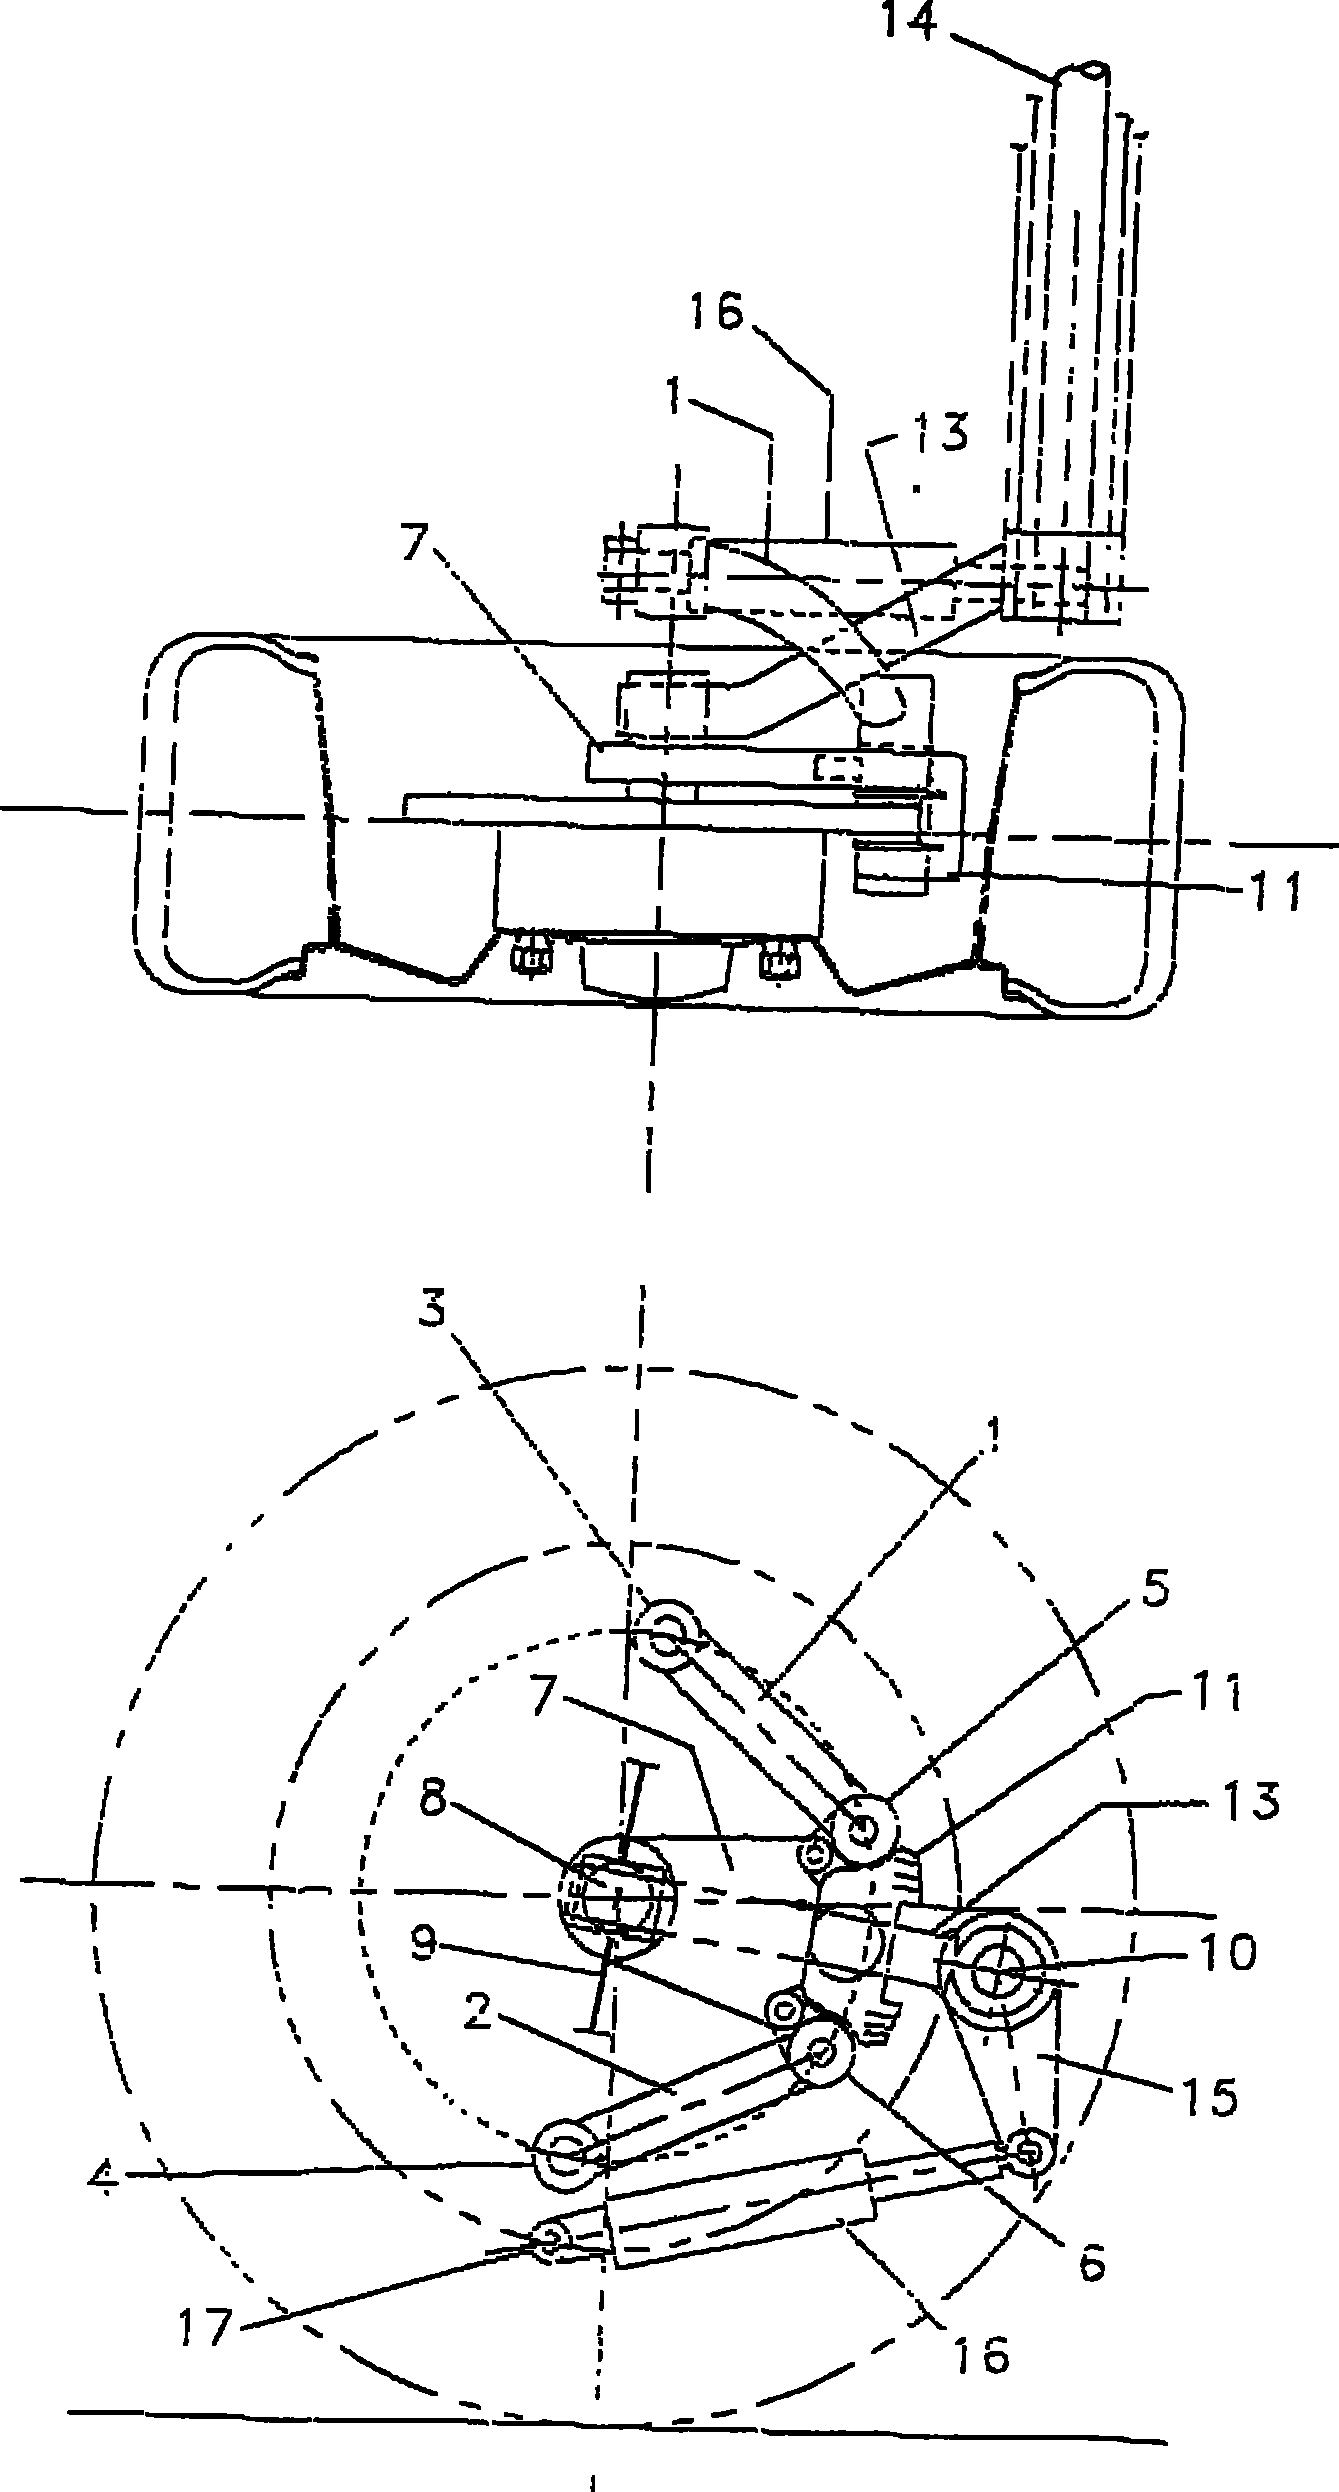 A suspension system for vehicles